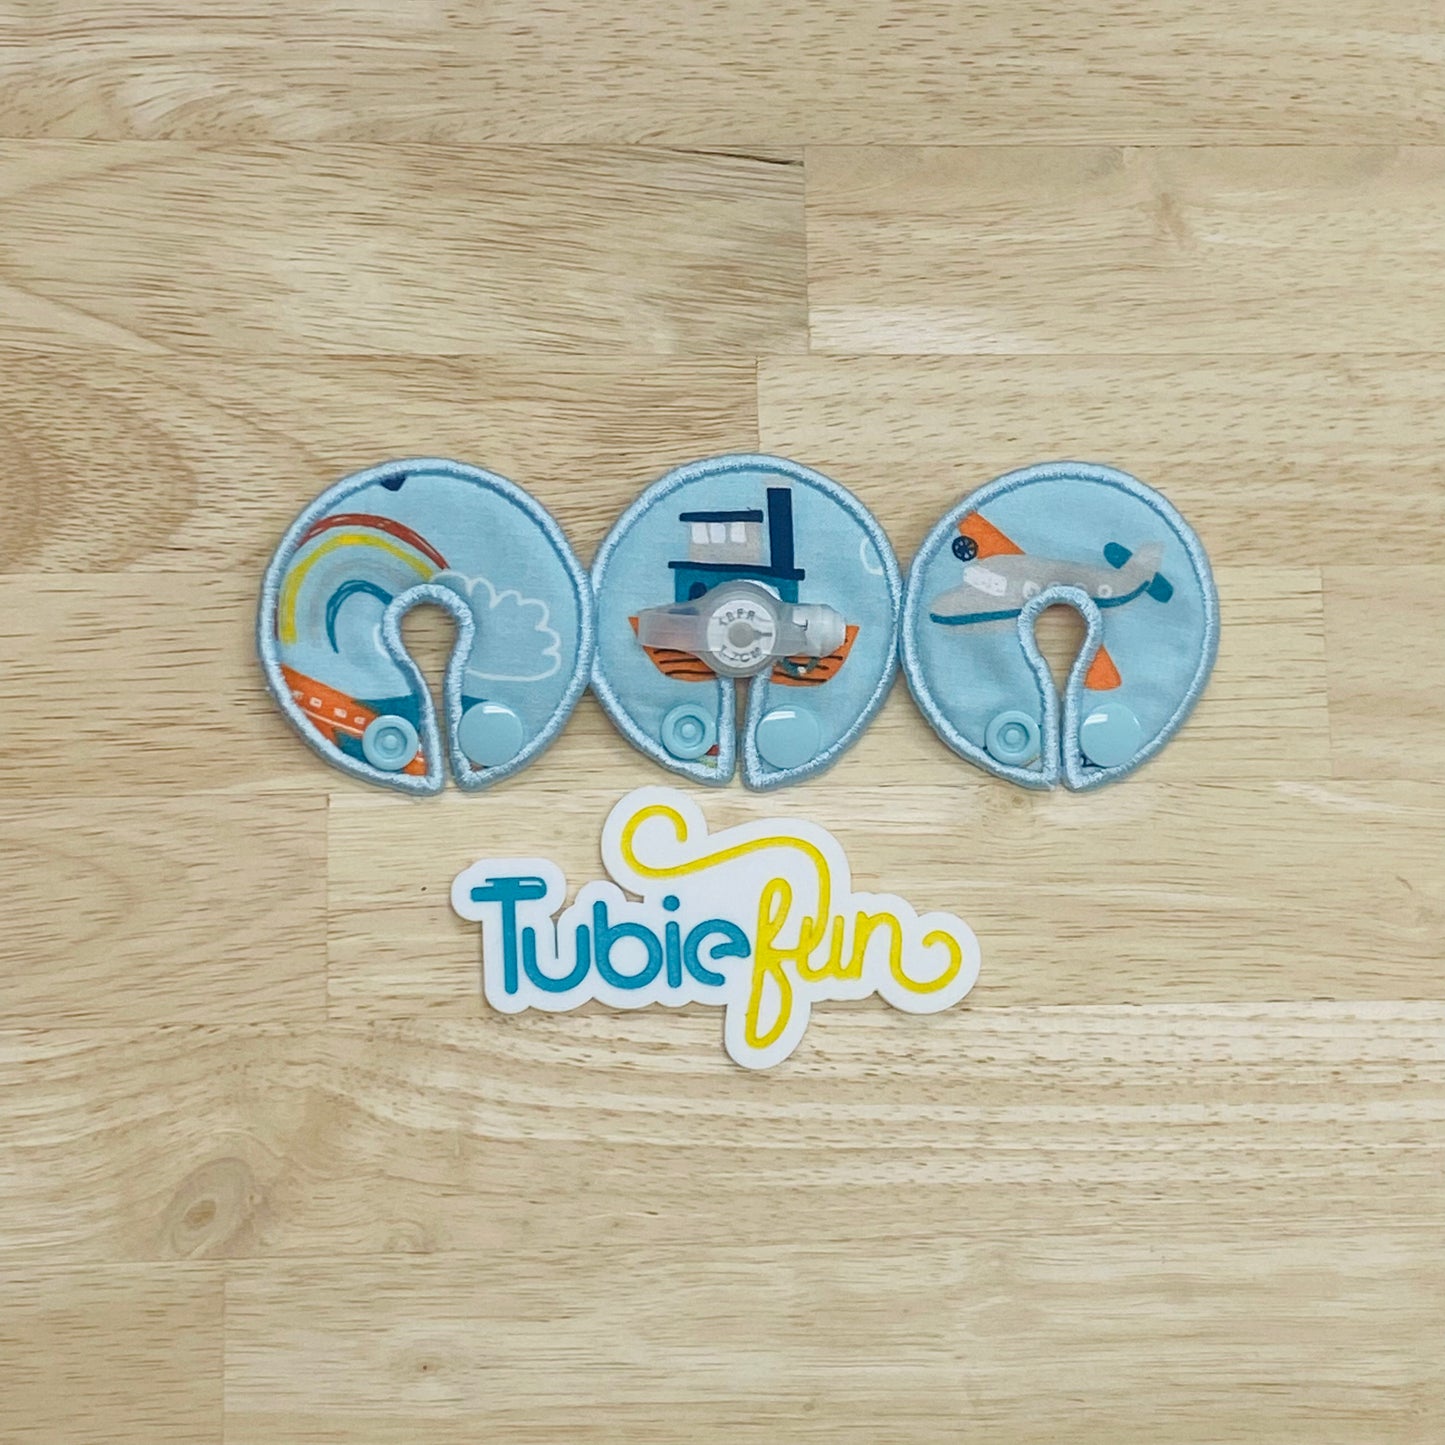 G-Tube Button Pad Cover - Boats, Planes and Rainbows